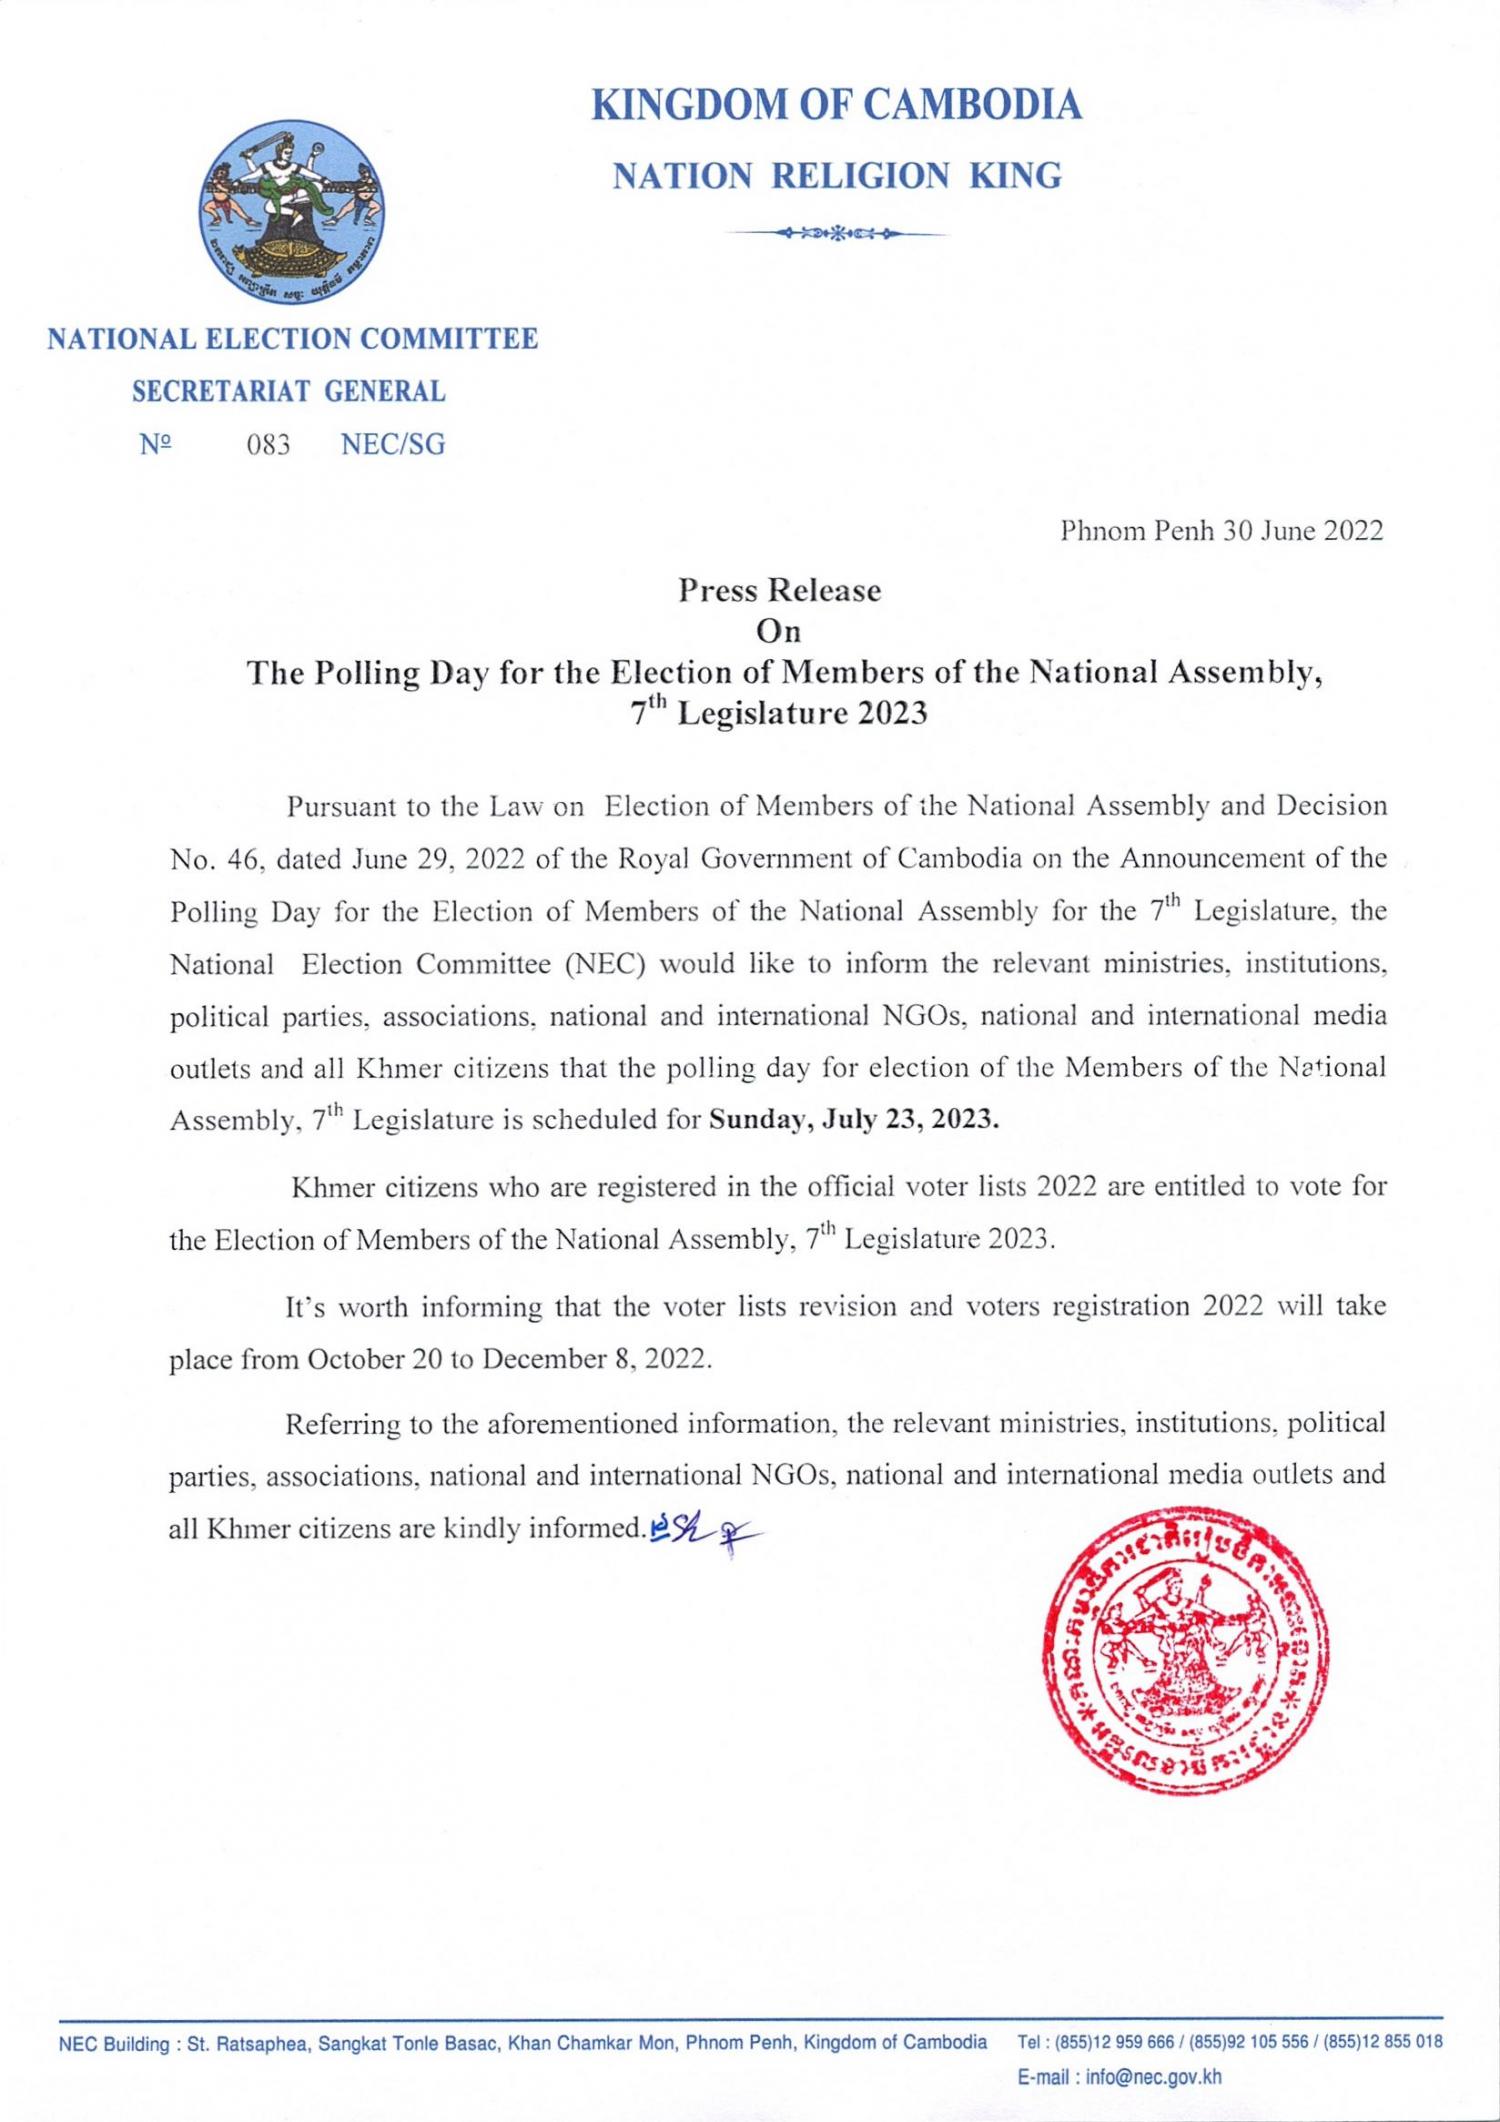 Press Release On The Polling Day for the Election of Members of the